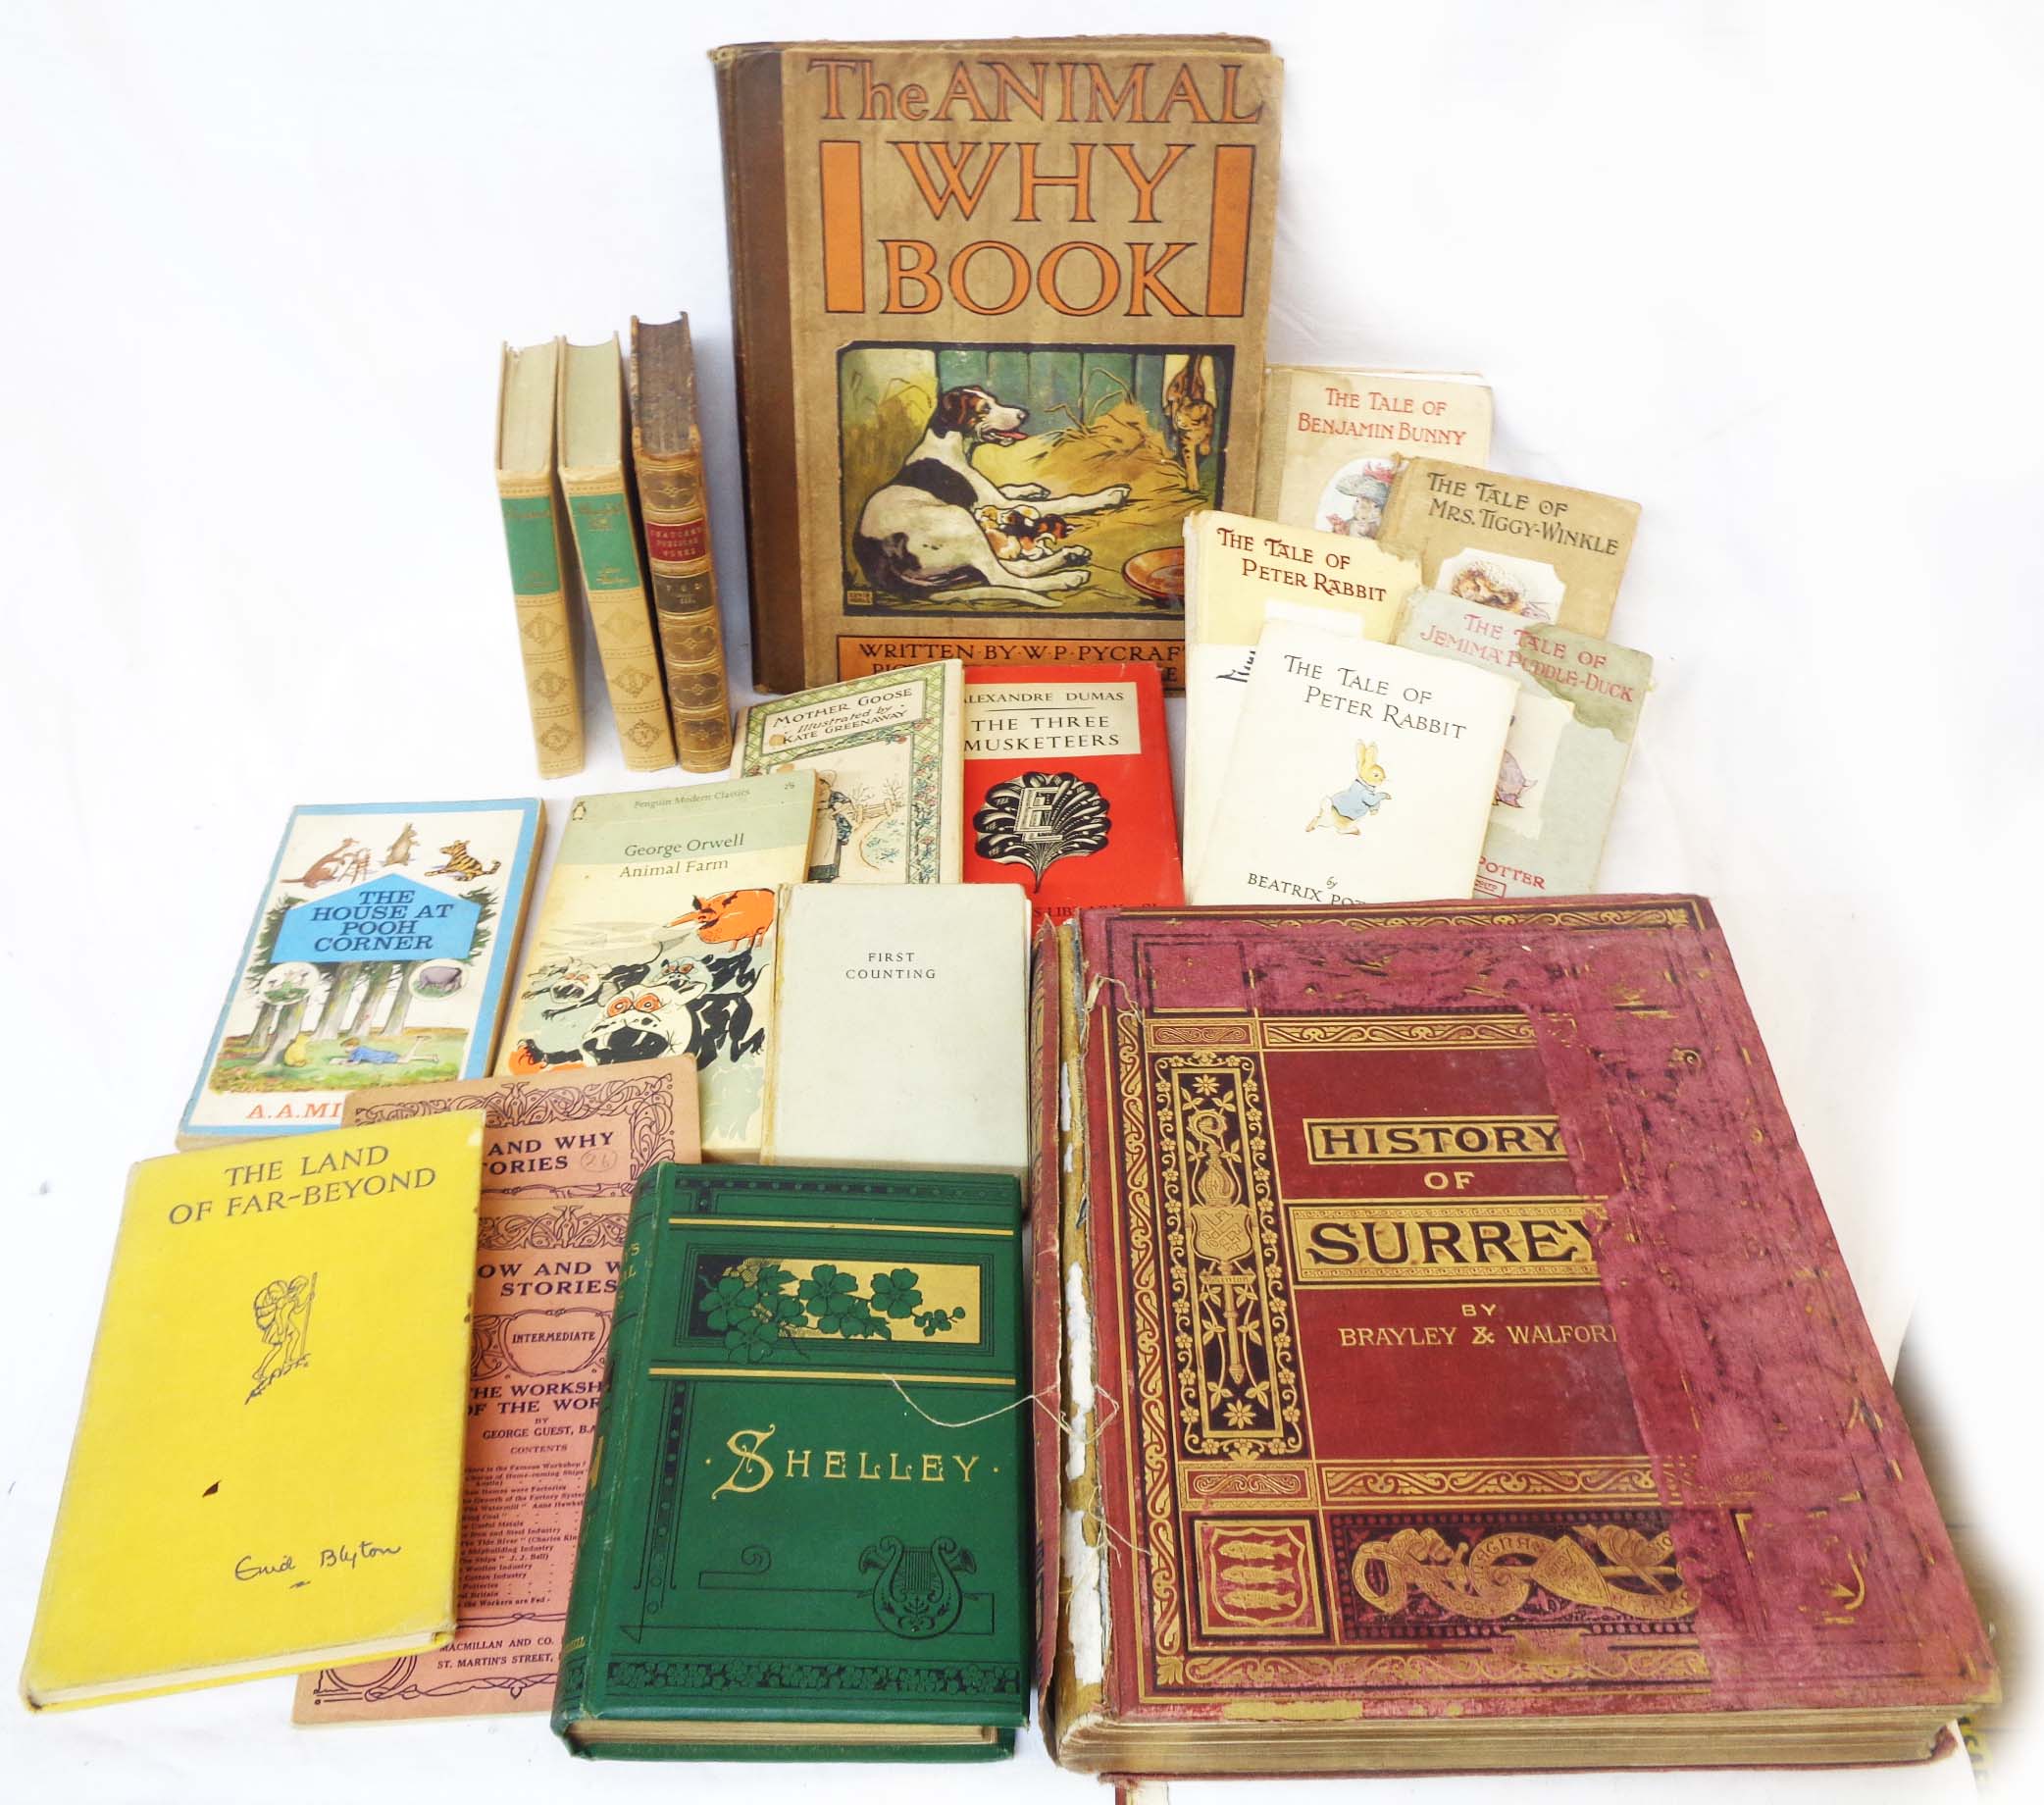 A selection of antiquarian and later books including The Animal Why Book by W.P. Wycraft with